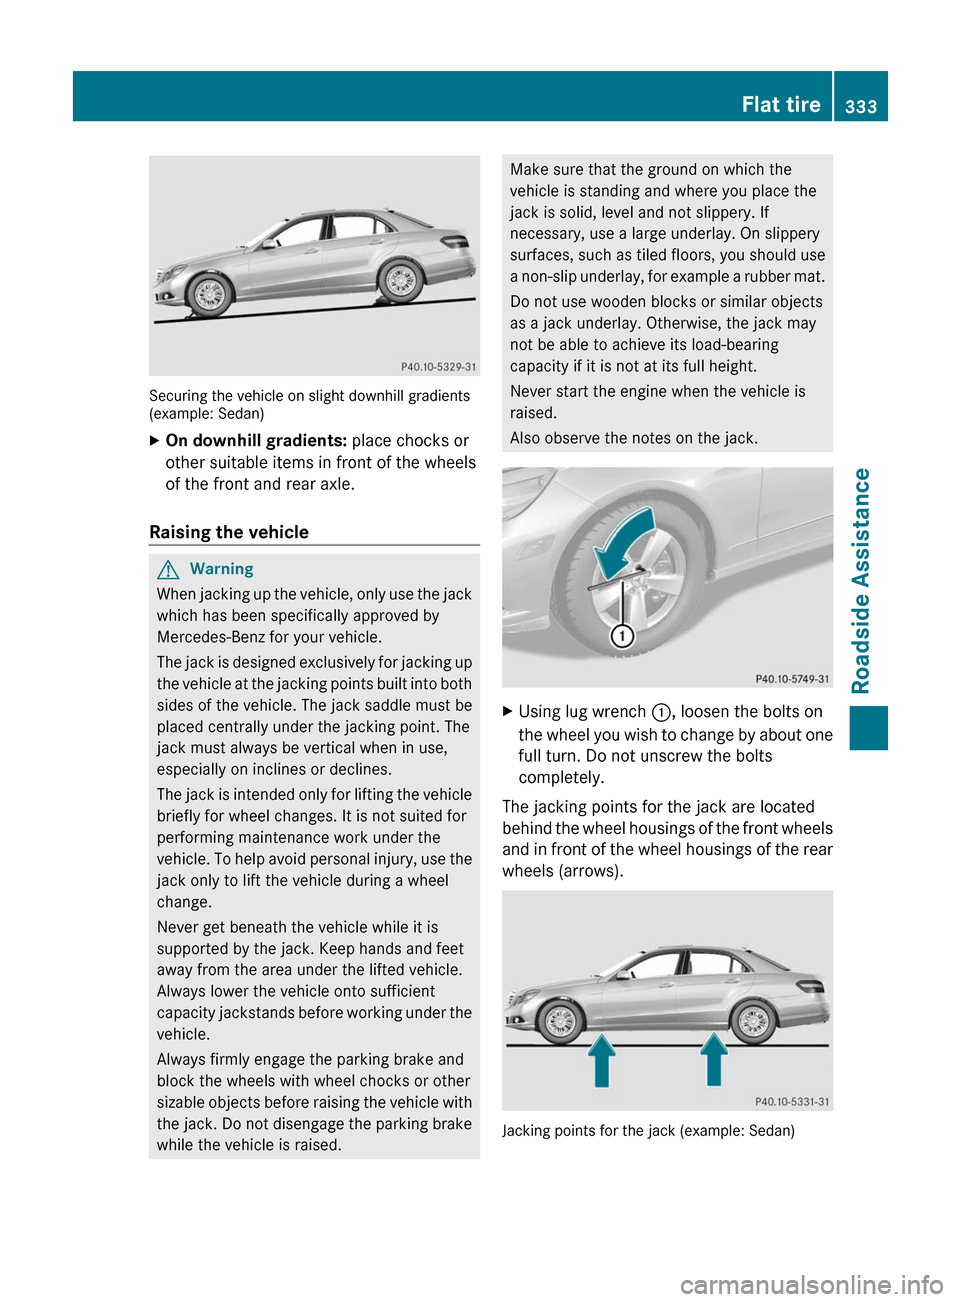 MERCEDES-BENZ E300 BLUETEC 2011 W212 Owners Manual Securing the vehicle on slight downhill gradients(example: Sedan)
XOn downhill gradients: place chocks or
other suitable items in front of the wheels
of the front and rear axle.
Raising the vehicle
GW